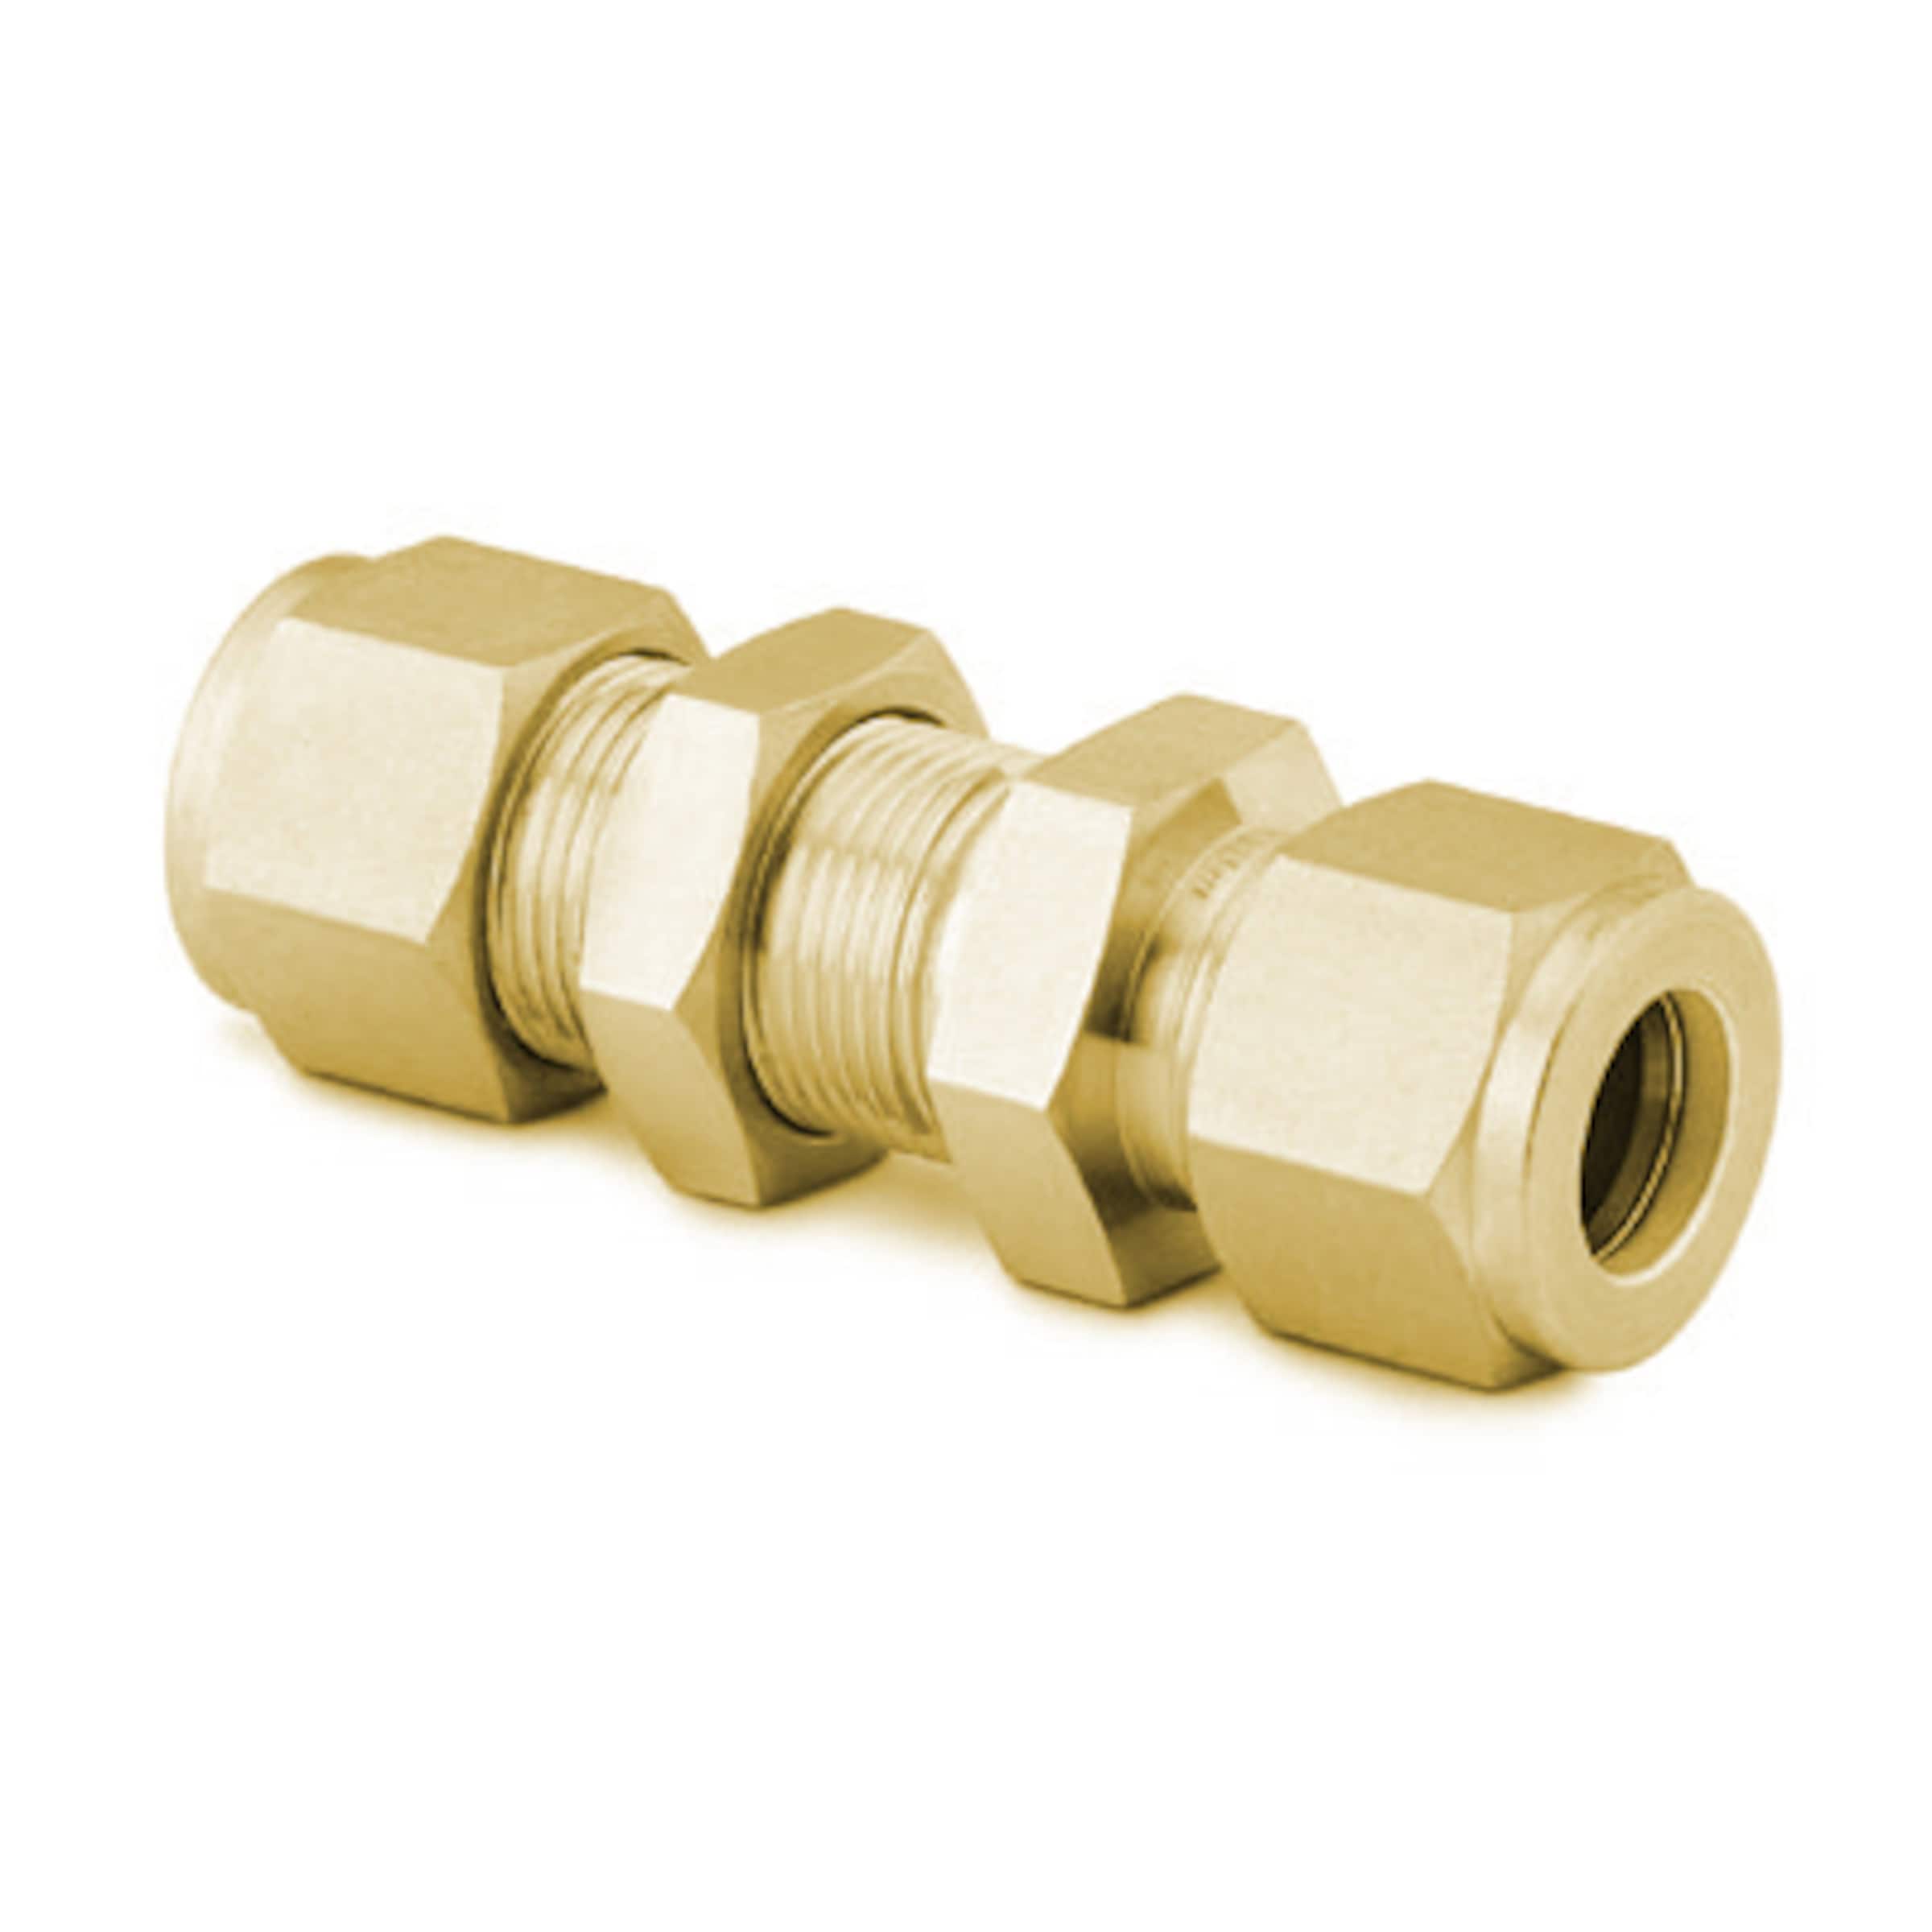 Brass Swagelok Tube Fitting, Male Tube Adapter, 1/4 in. Tube OD x 1/4 in.  Male NPT, Tube Adapters, Tube Fittings and Adapters, Fittings, All  Products